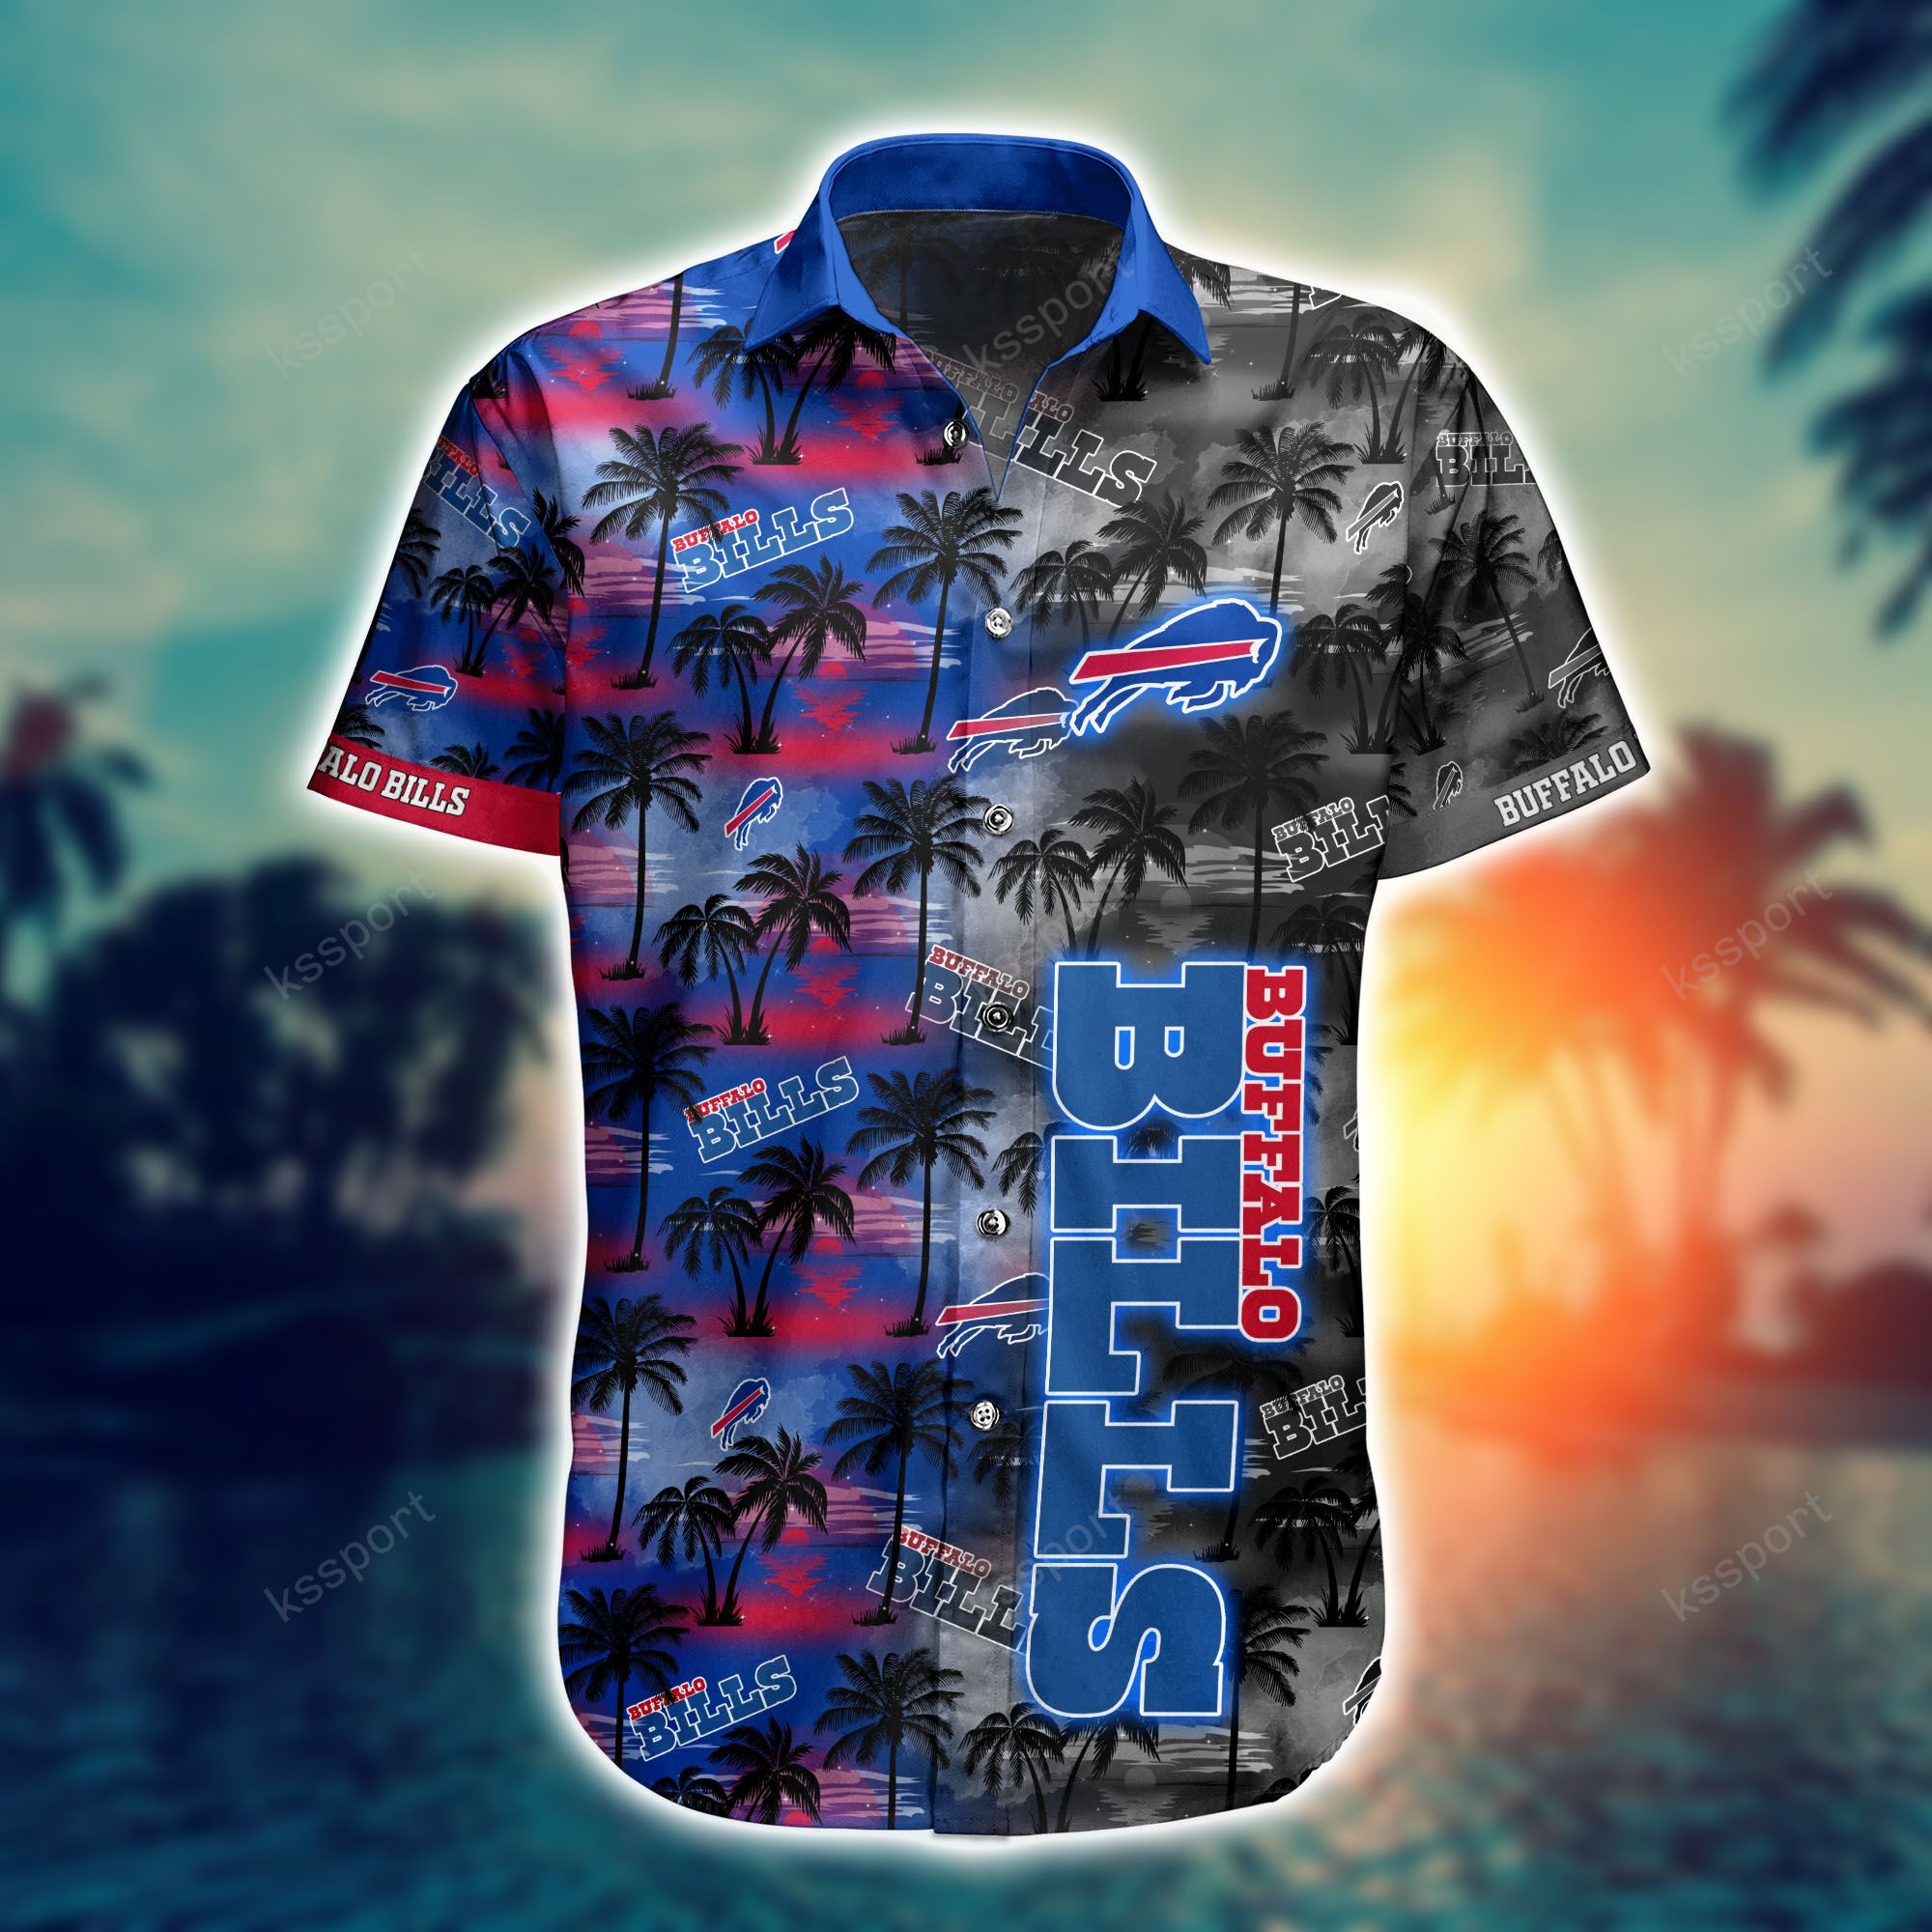 Top cool Hawaiian shirt 2022 - Make sure you get yours today before they run out! 201